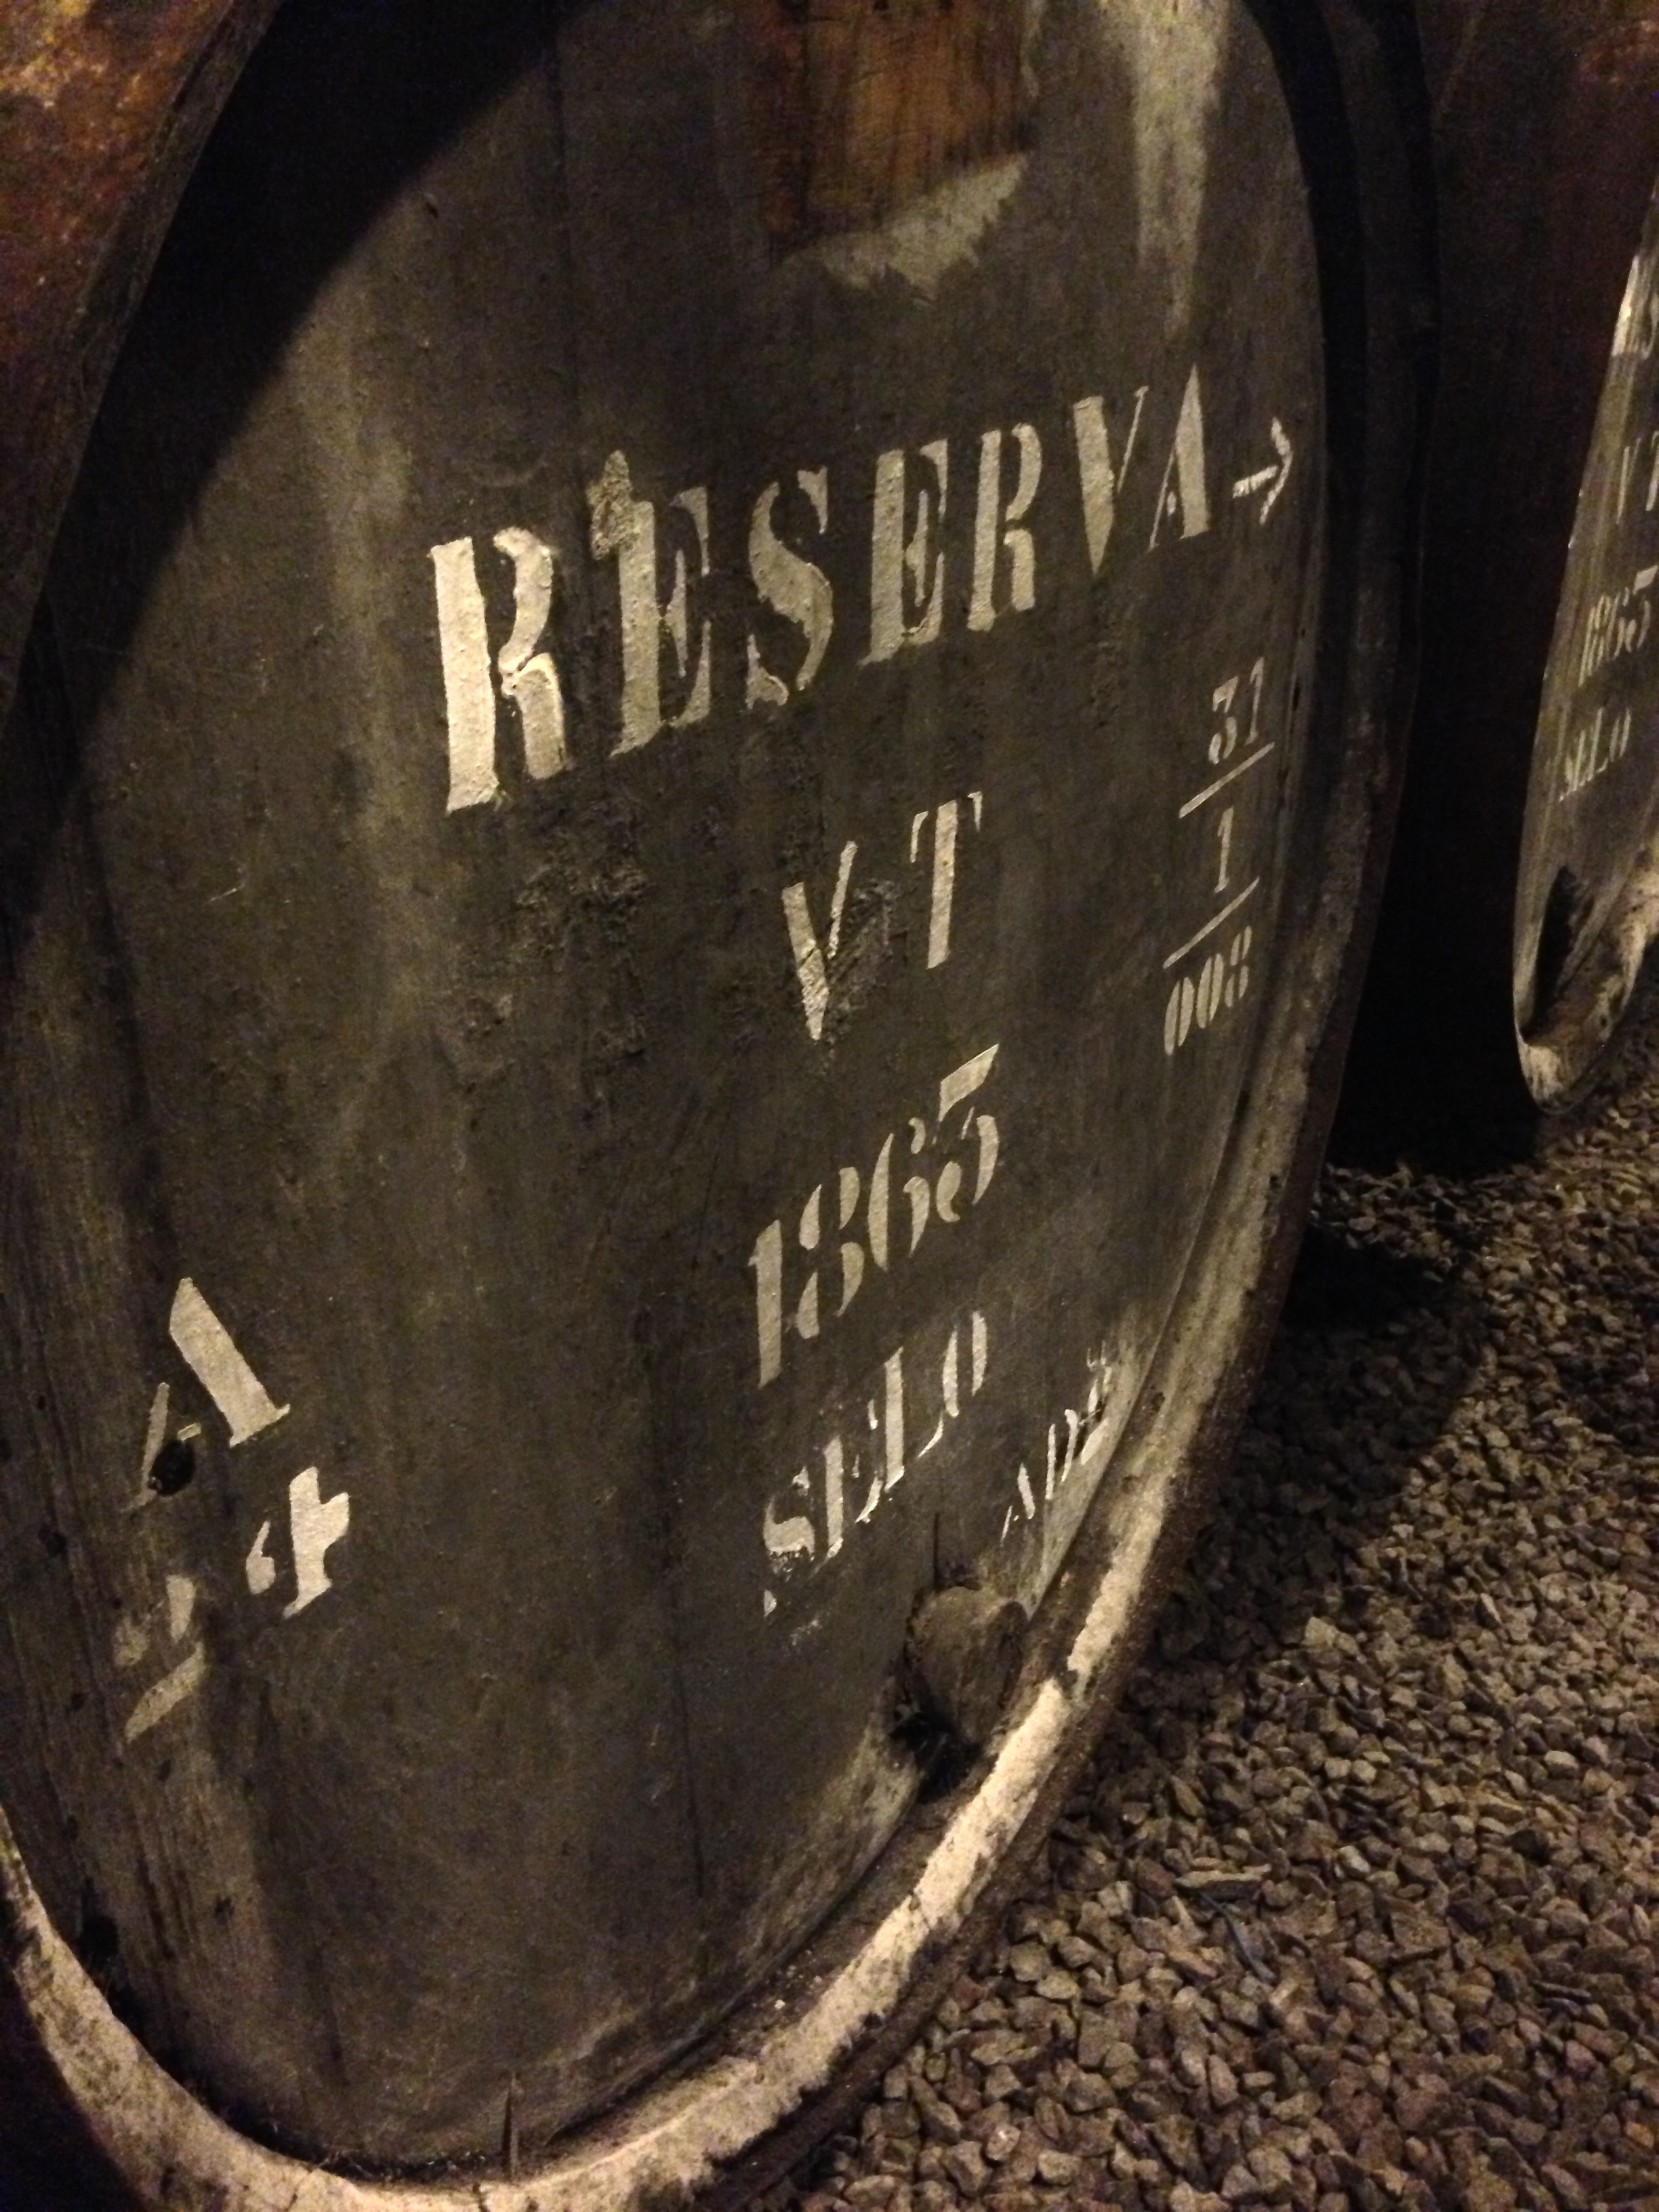 Krohn 1863: only three casks left of this, apparently the oldest port still ageing in oak.